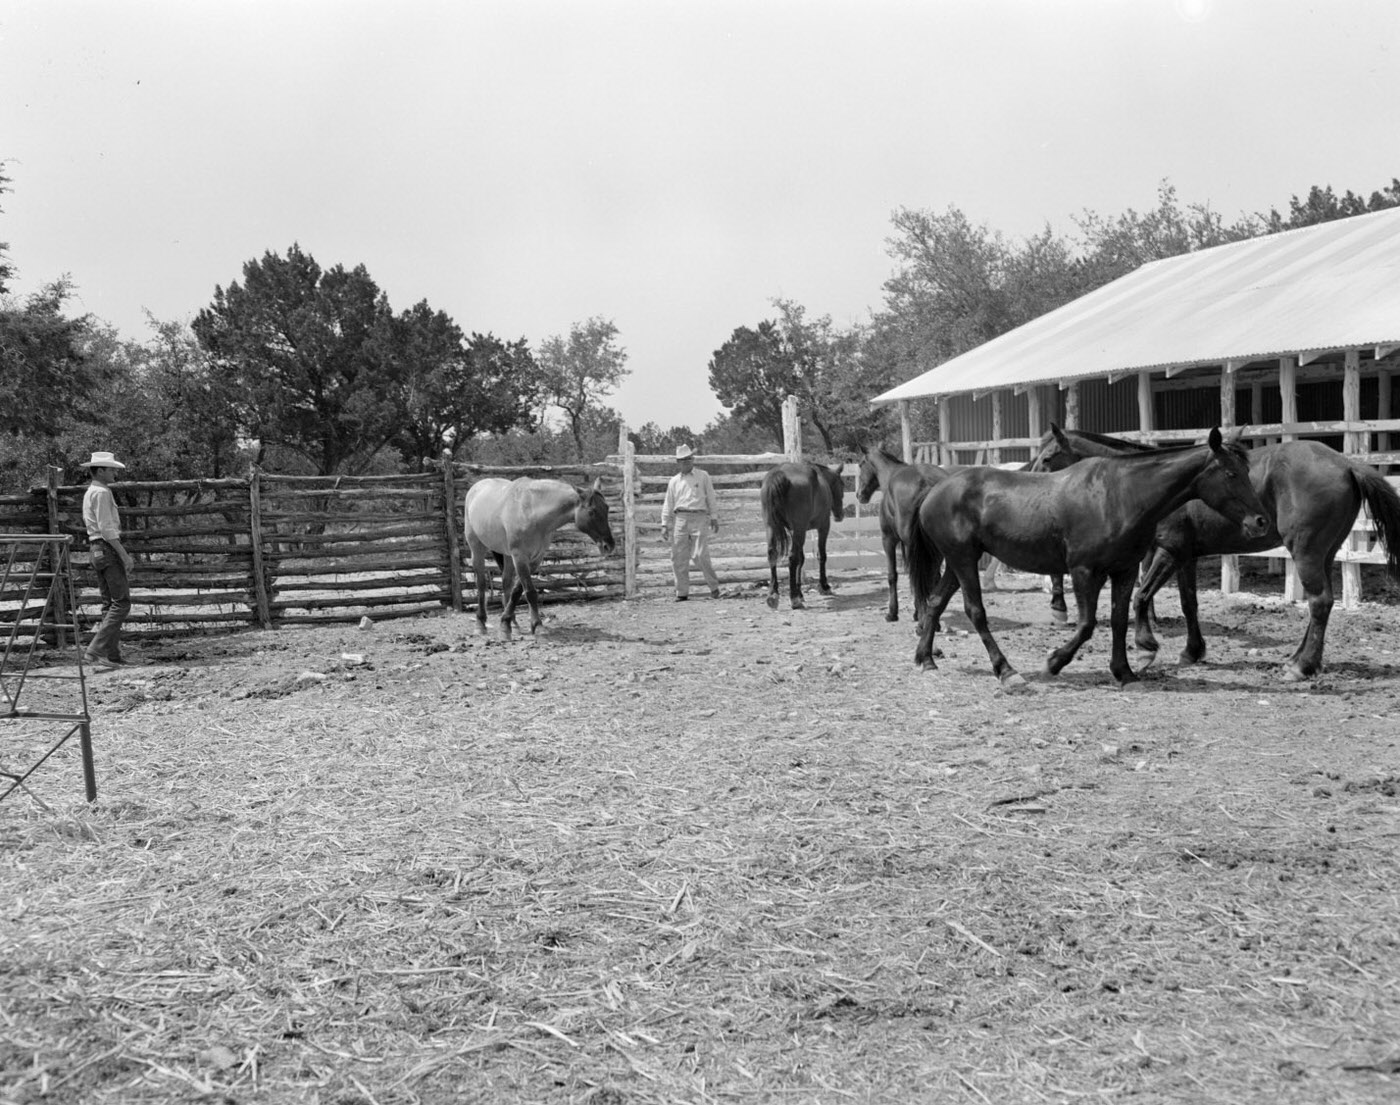 Men and Horses in Bar K Ranch Corral, 1953.